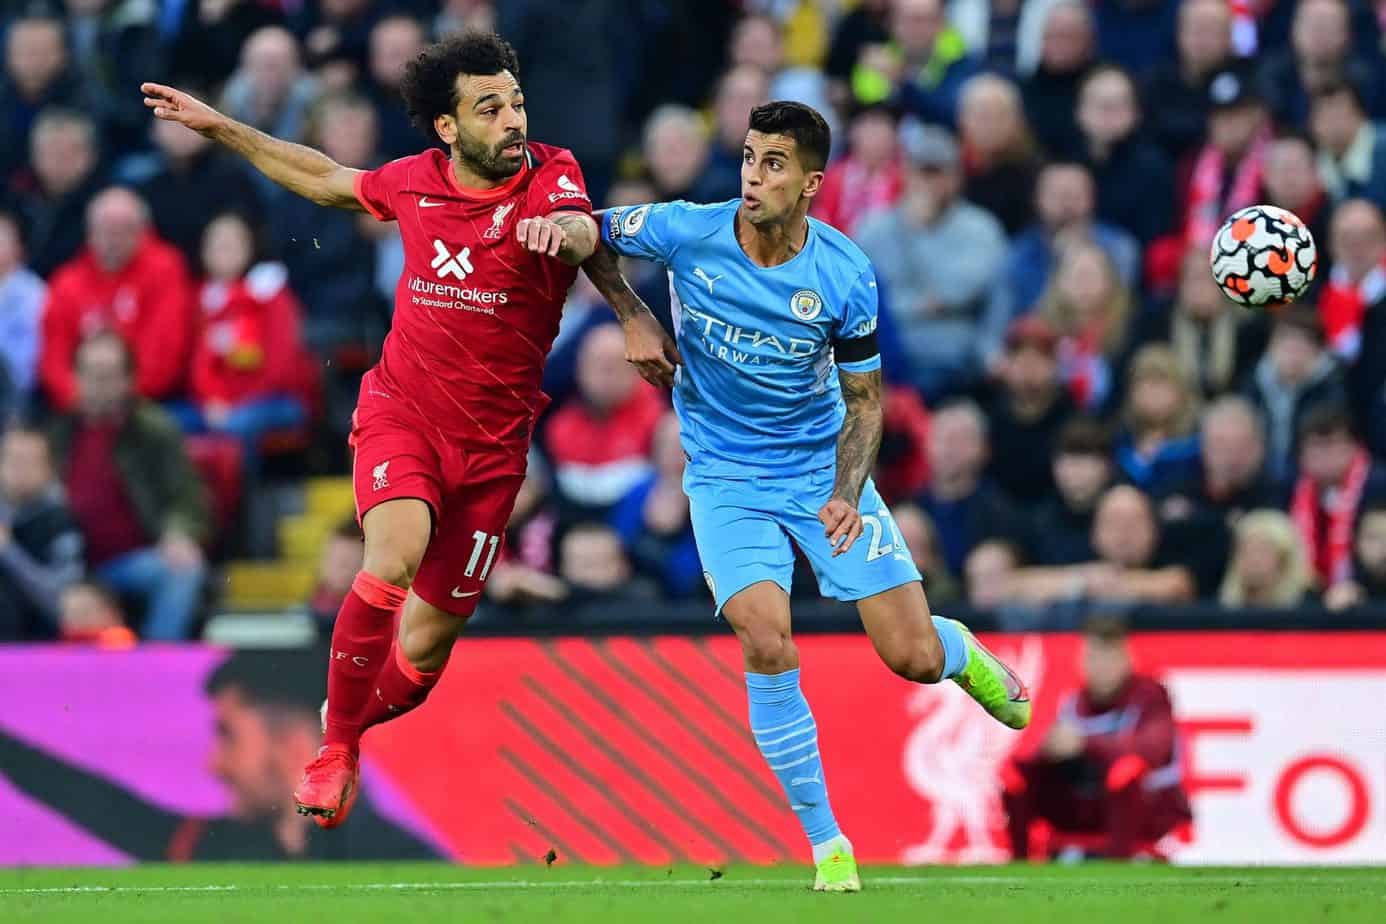 Liverpool vs. Manchester City – Betting Odds and Preview